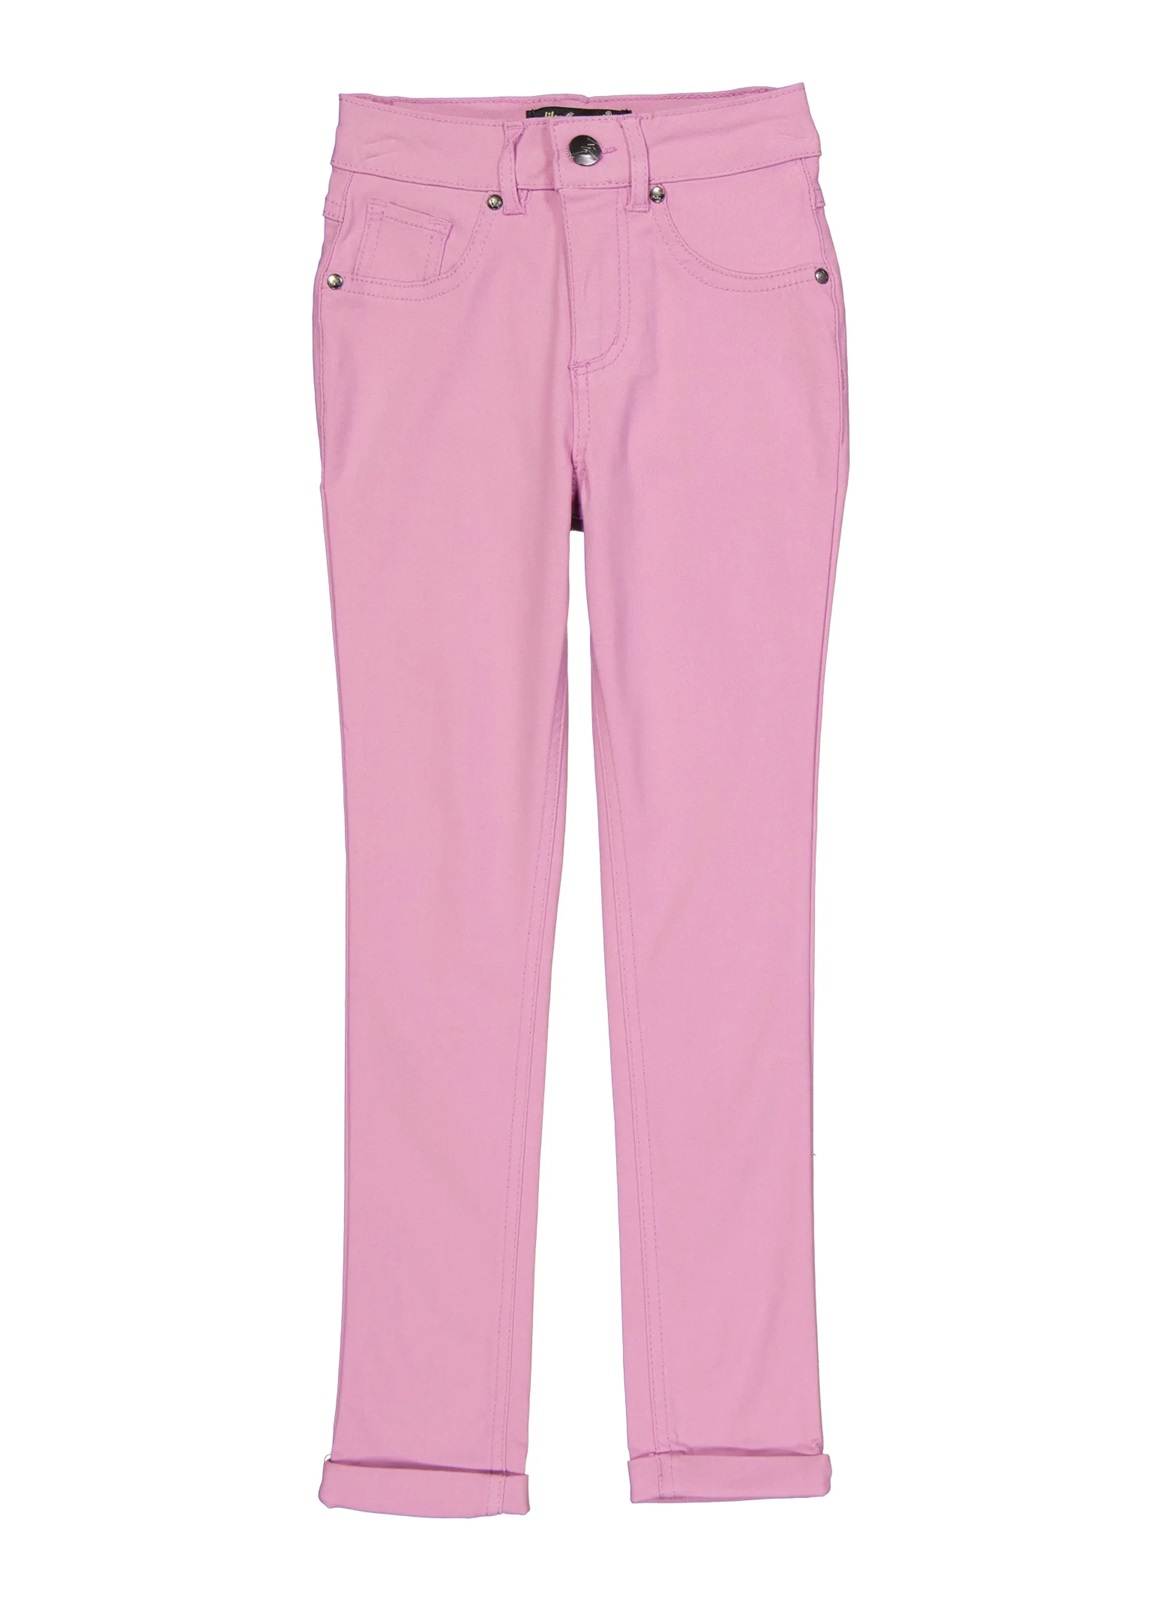 Girls Hyperstretch Fixed Cuff Pants